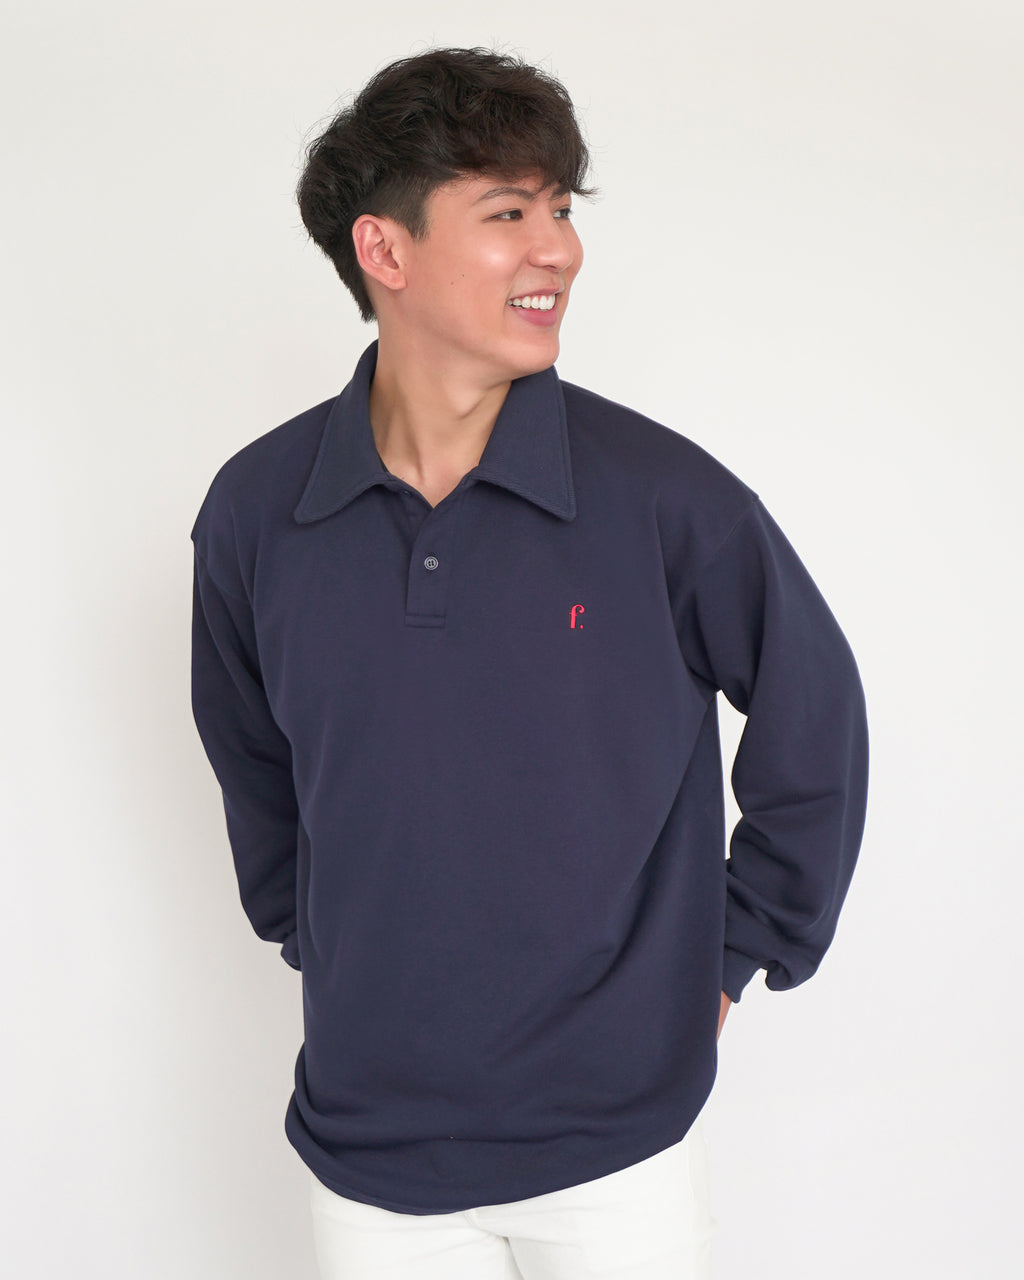 JOELLE Oversize Sweater Top only in Navy Blue